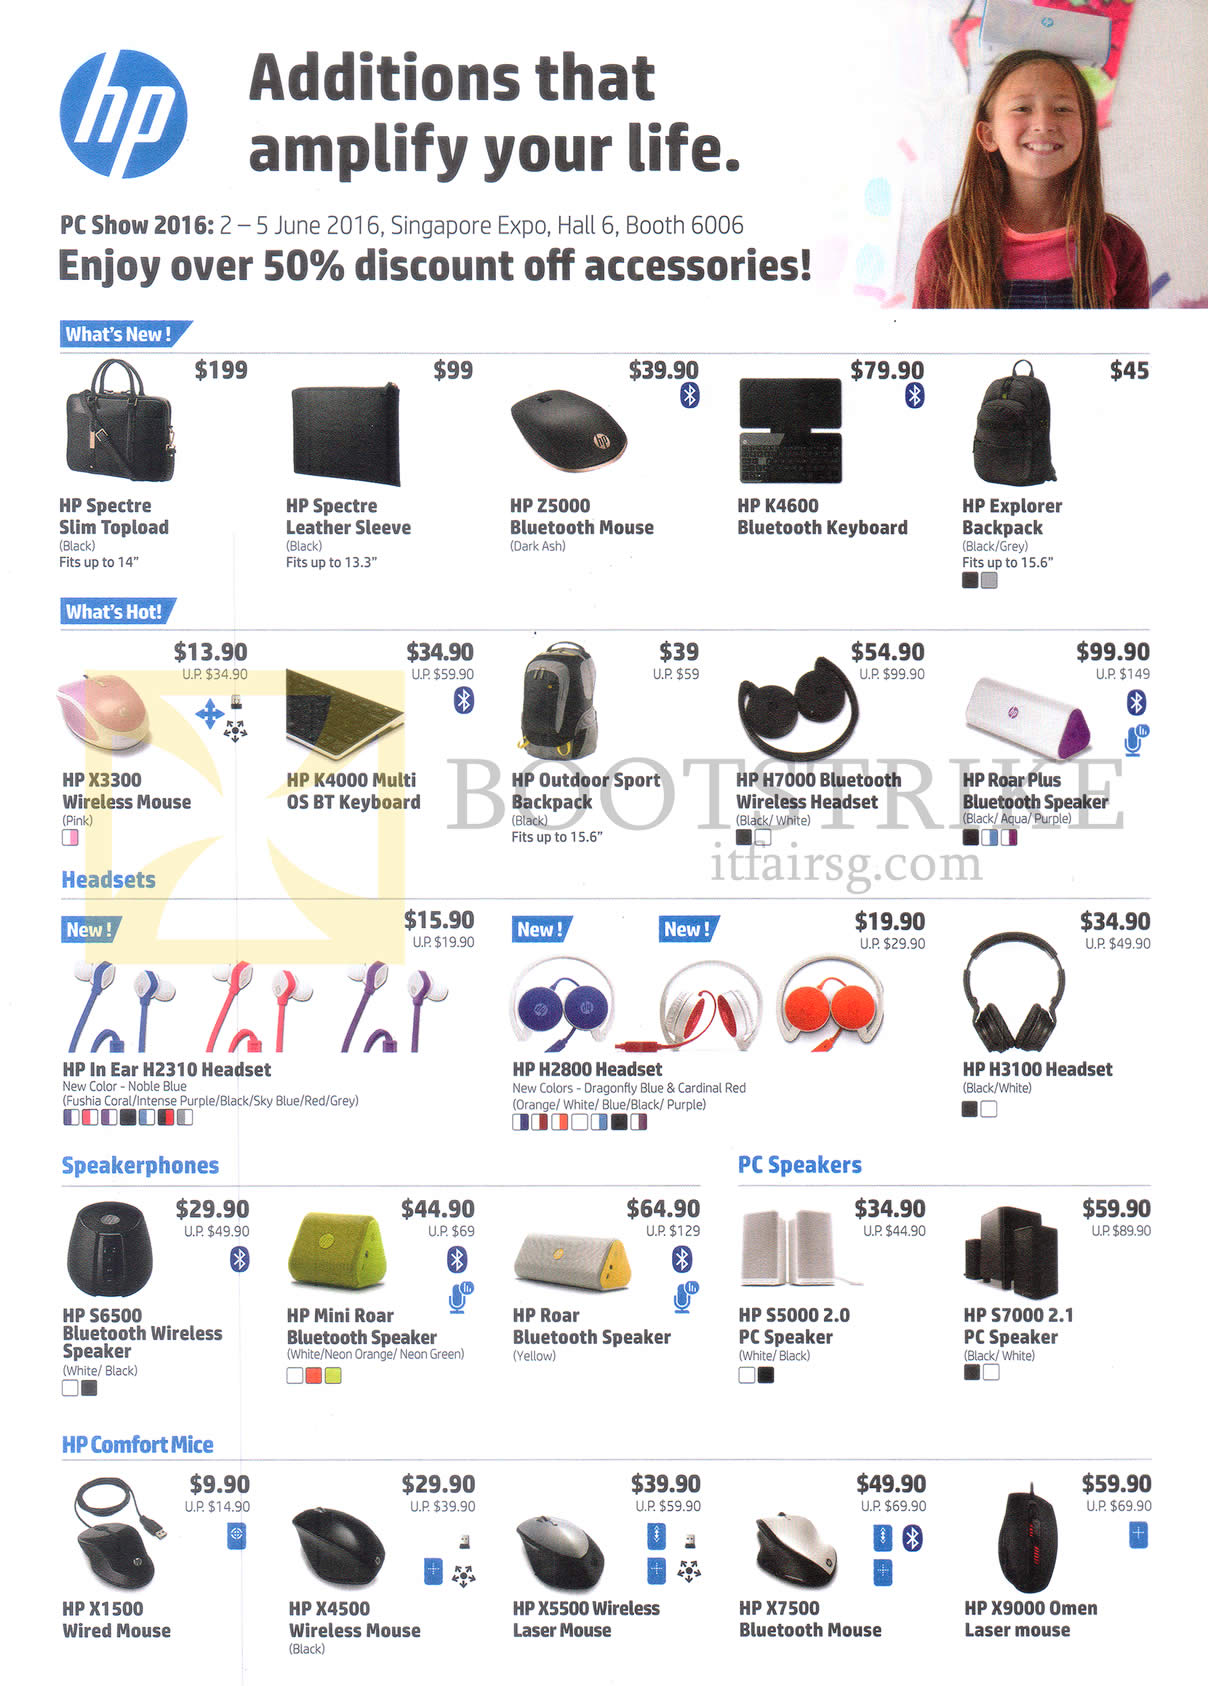 PC SHOW 2016 price list image brochure of HP Accessories Laptop Carrying Case, Mouse, Headset, Speaker, Mouse, HP Spectre, Z5000, K4600, X3300, K4000, H3100, H2800, S6500, S5000, S7000, X1500